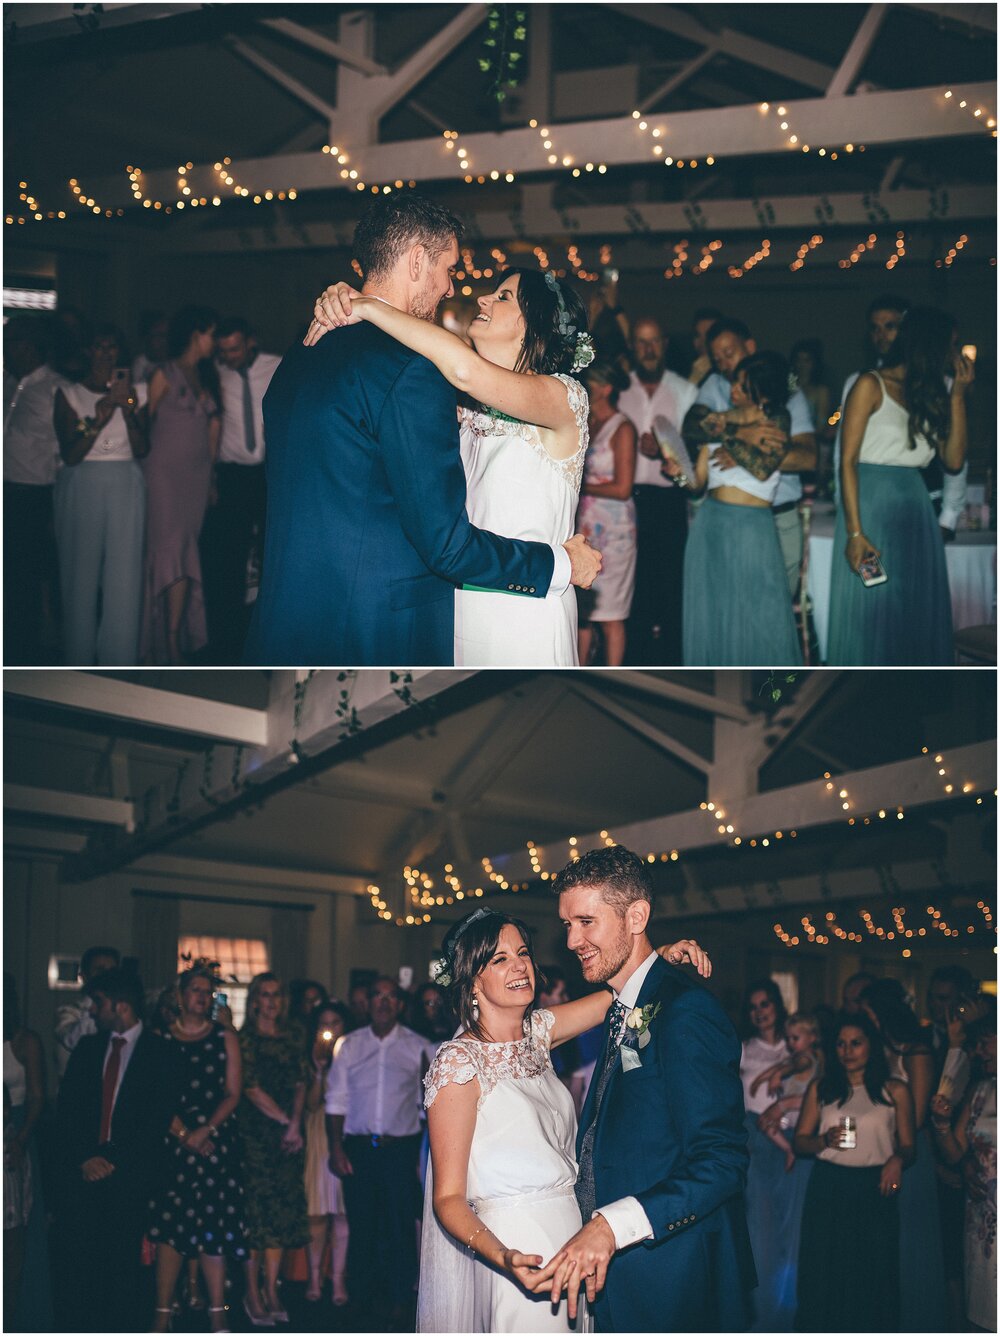 First Dance at Quarry Bank Mill wedding in Cheshire near to Manchester.